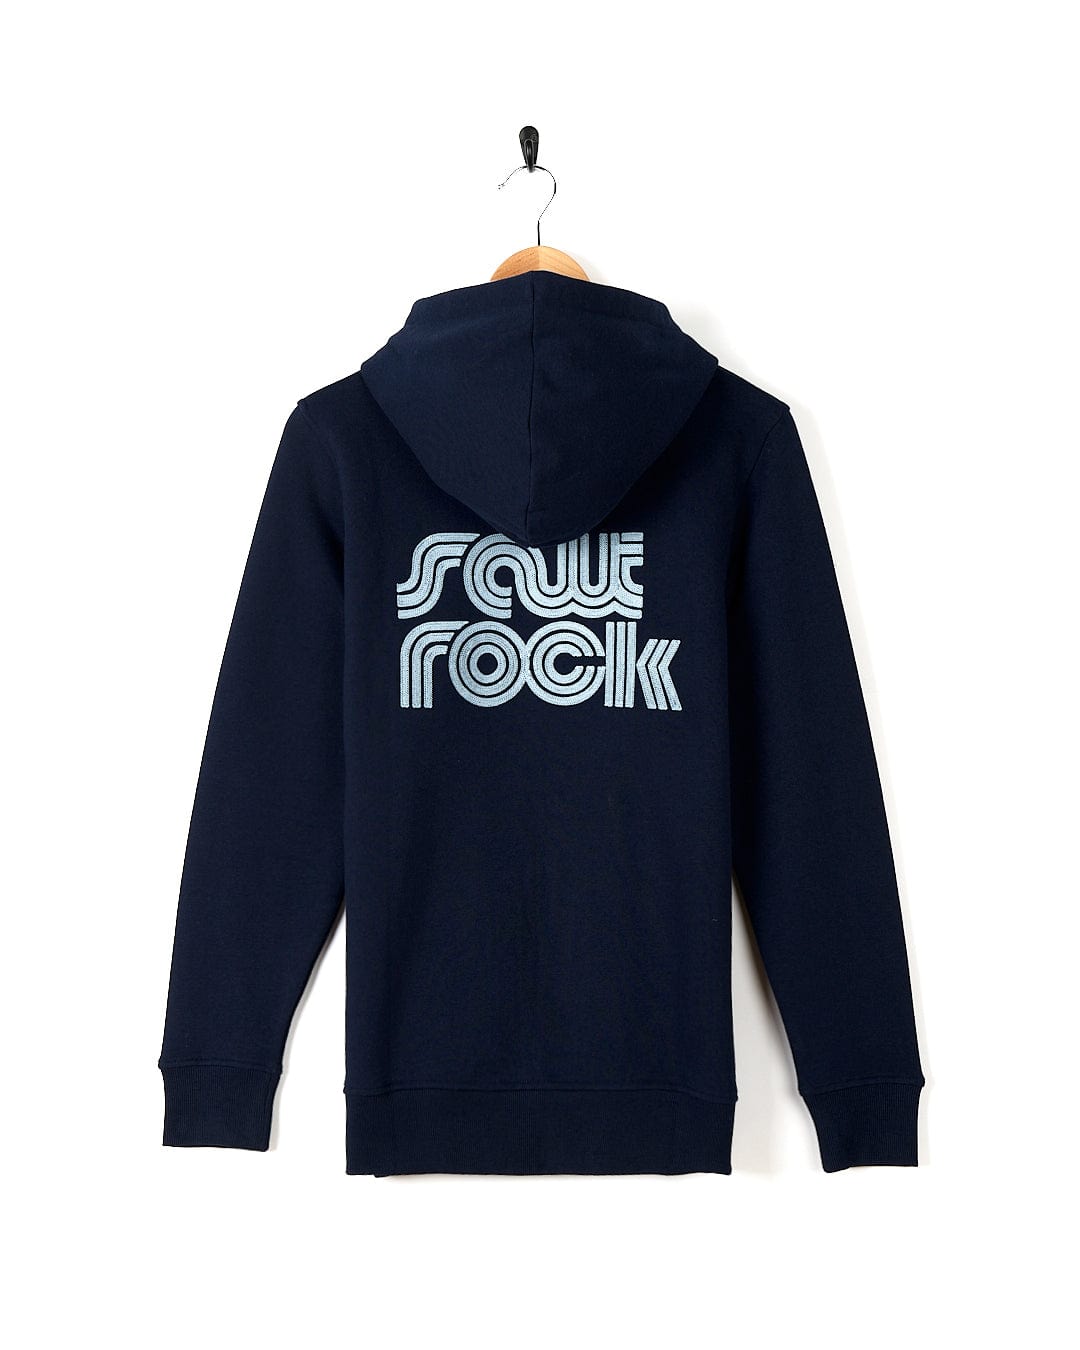 A Retro Wave Emb - Womens Zip Hoodie - Blue Saltrock with the word squee rock on it featuring front pockets and hood lining.